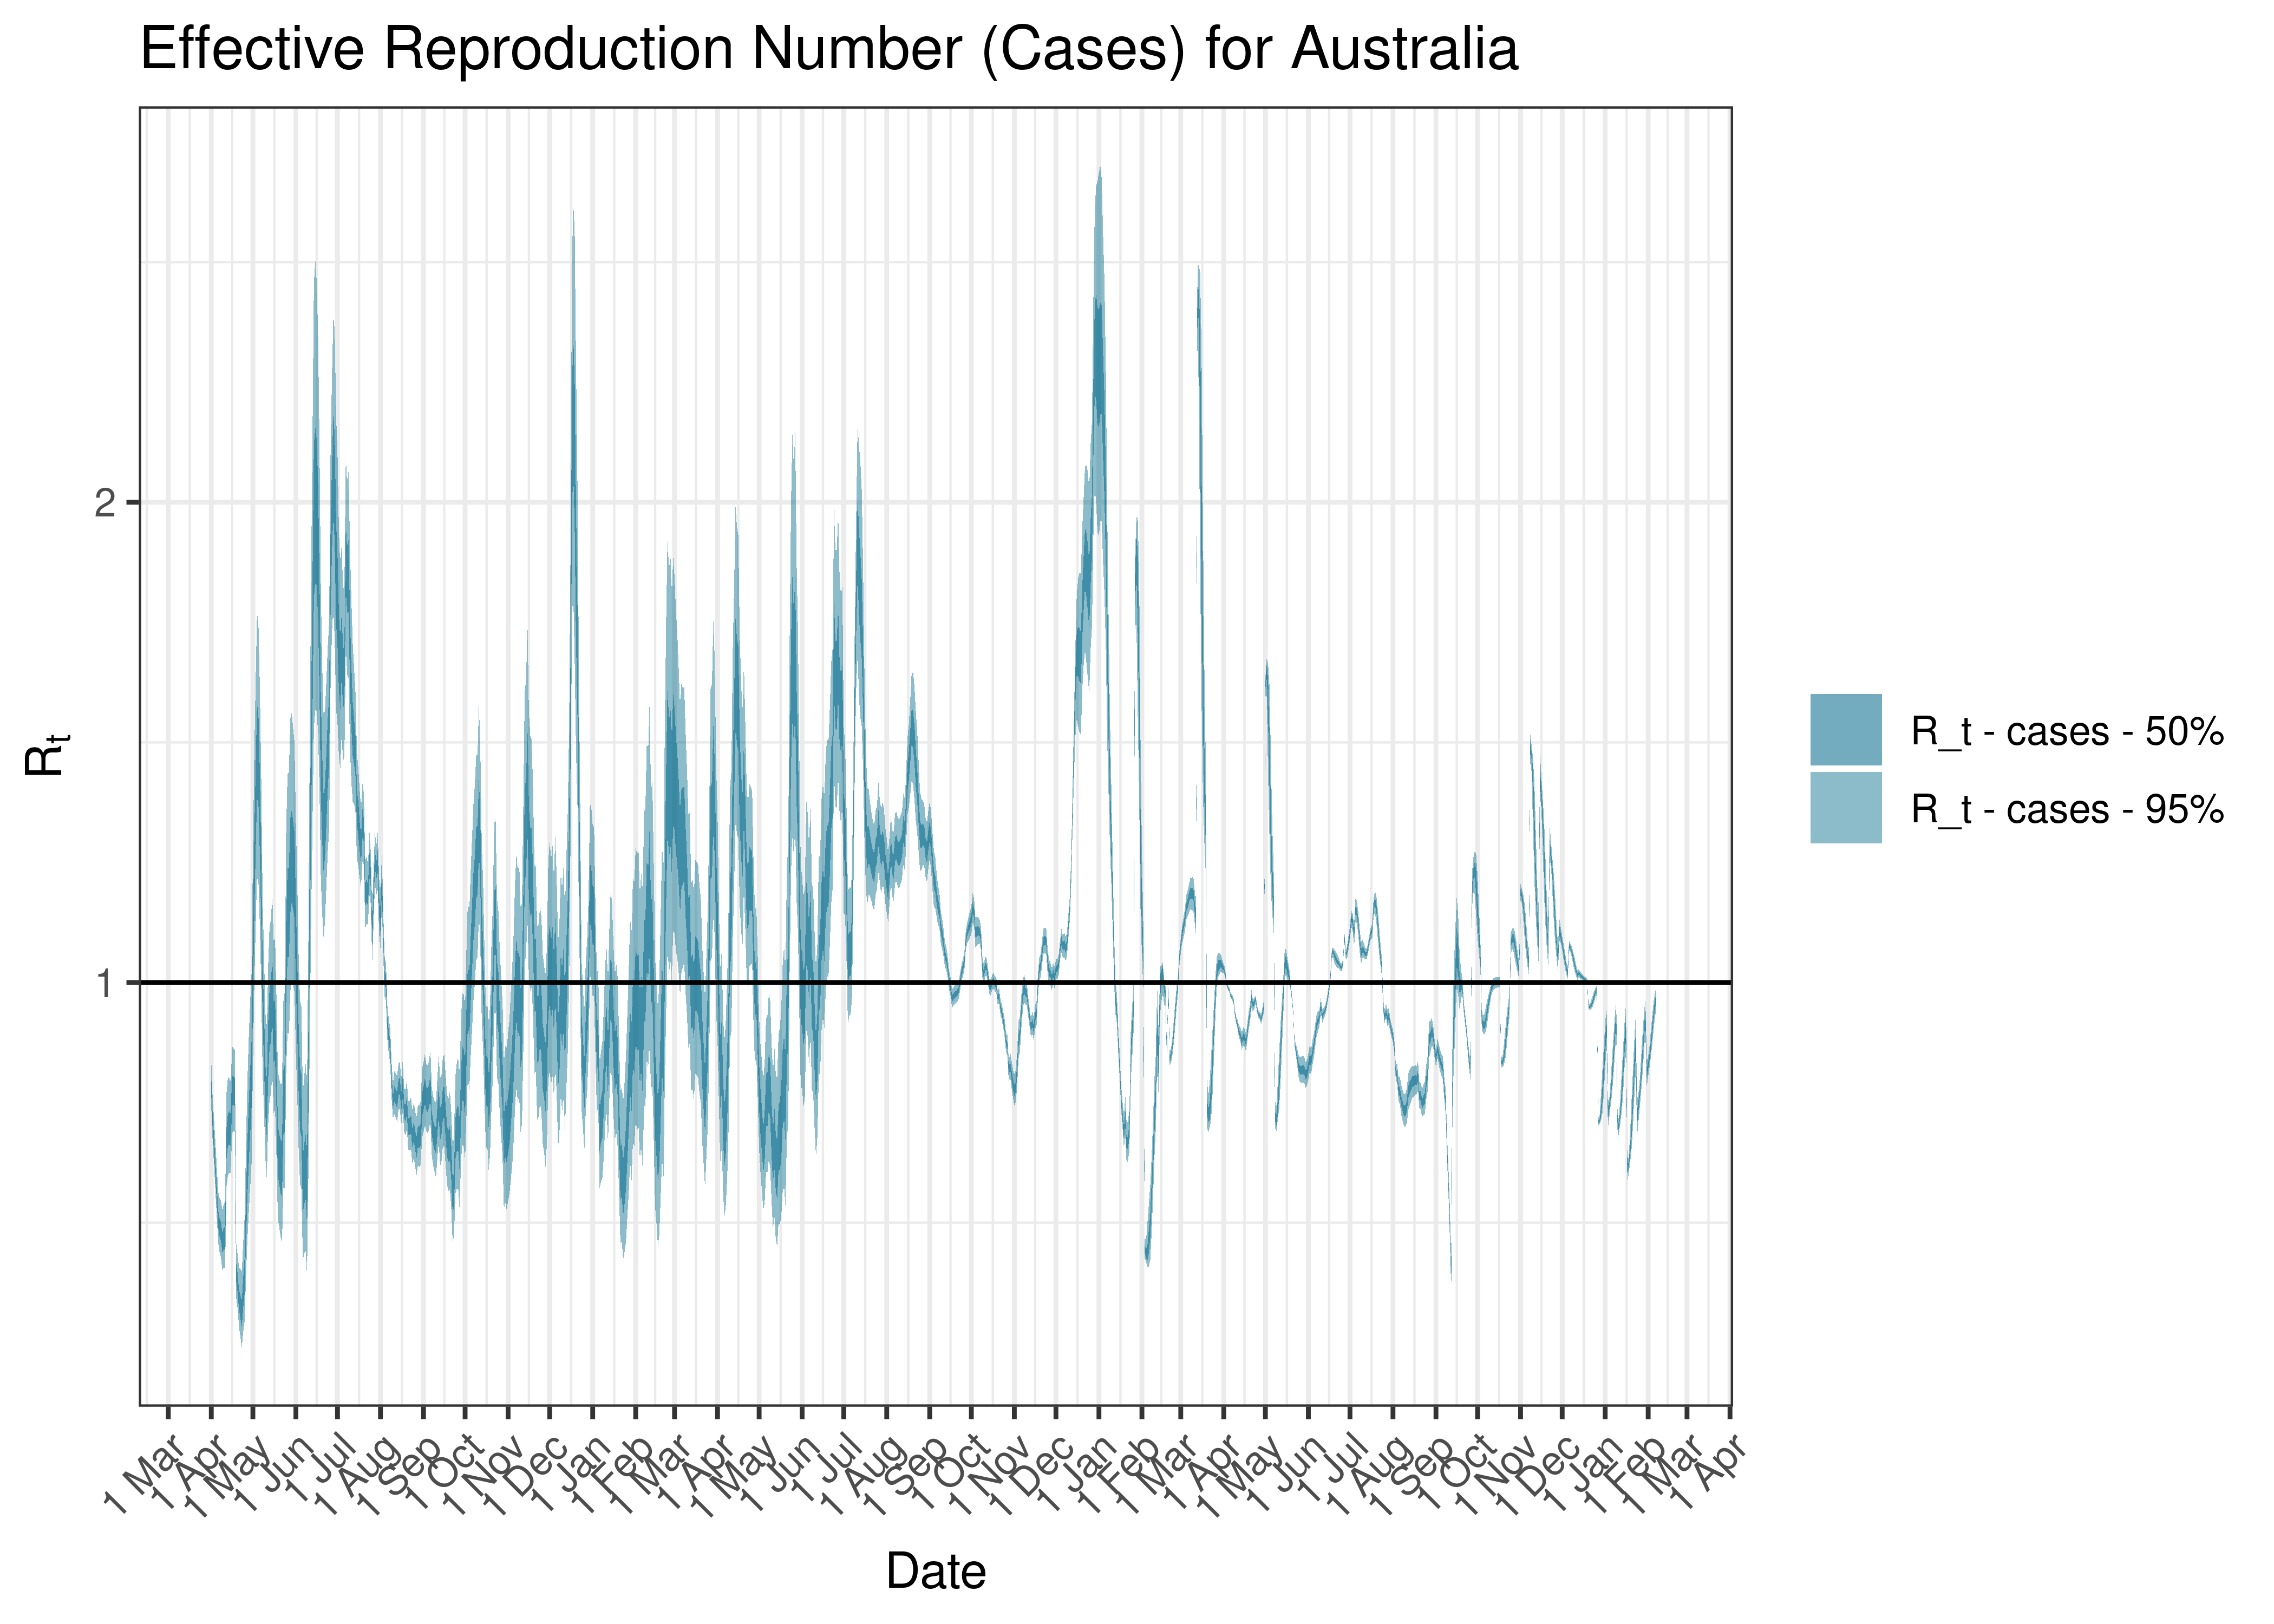 Estimated Effective Reproduction Number Based on Cases for Australia since 1 April 2020